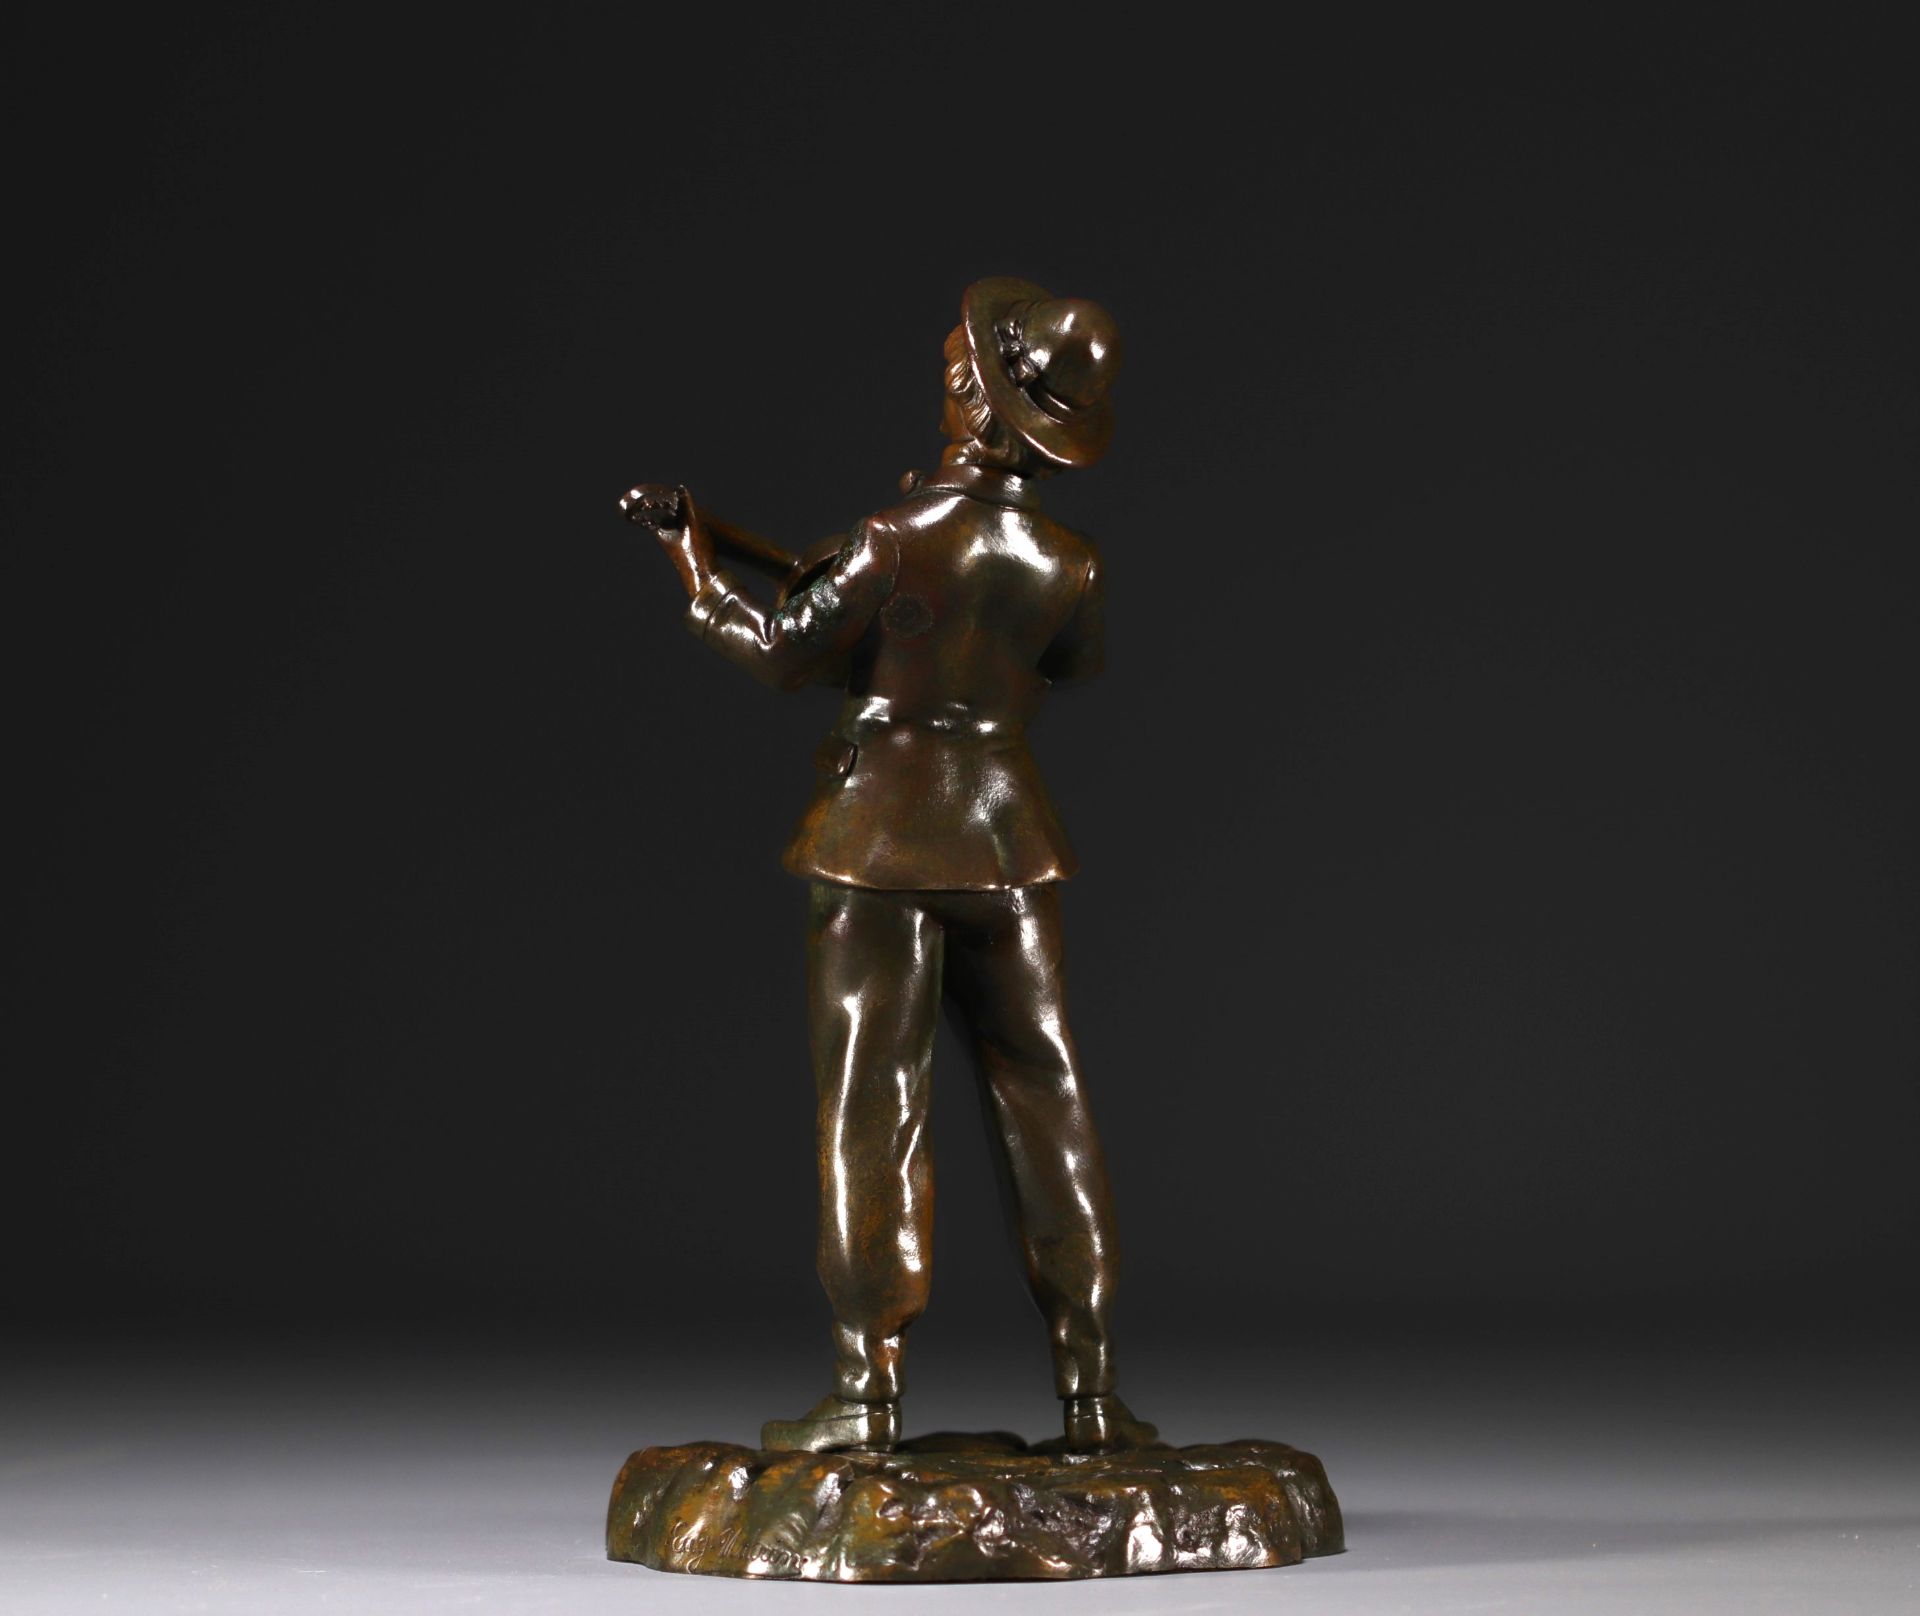 Eugene WATRIN - "Young boy with a guitar" Bronze sculpture. - Image 4 of 6